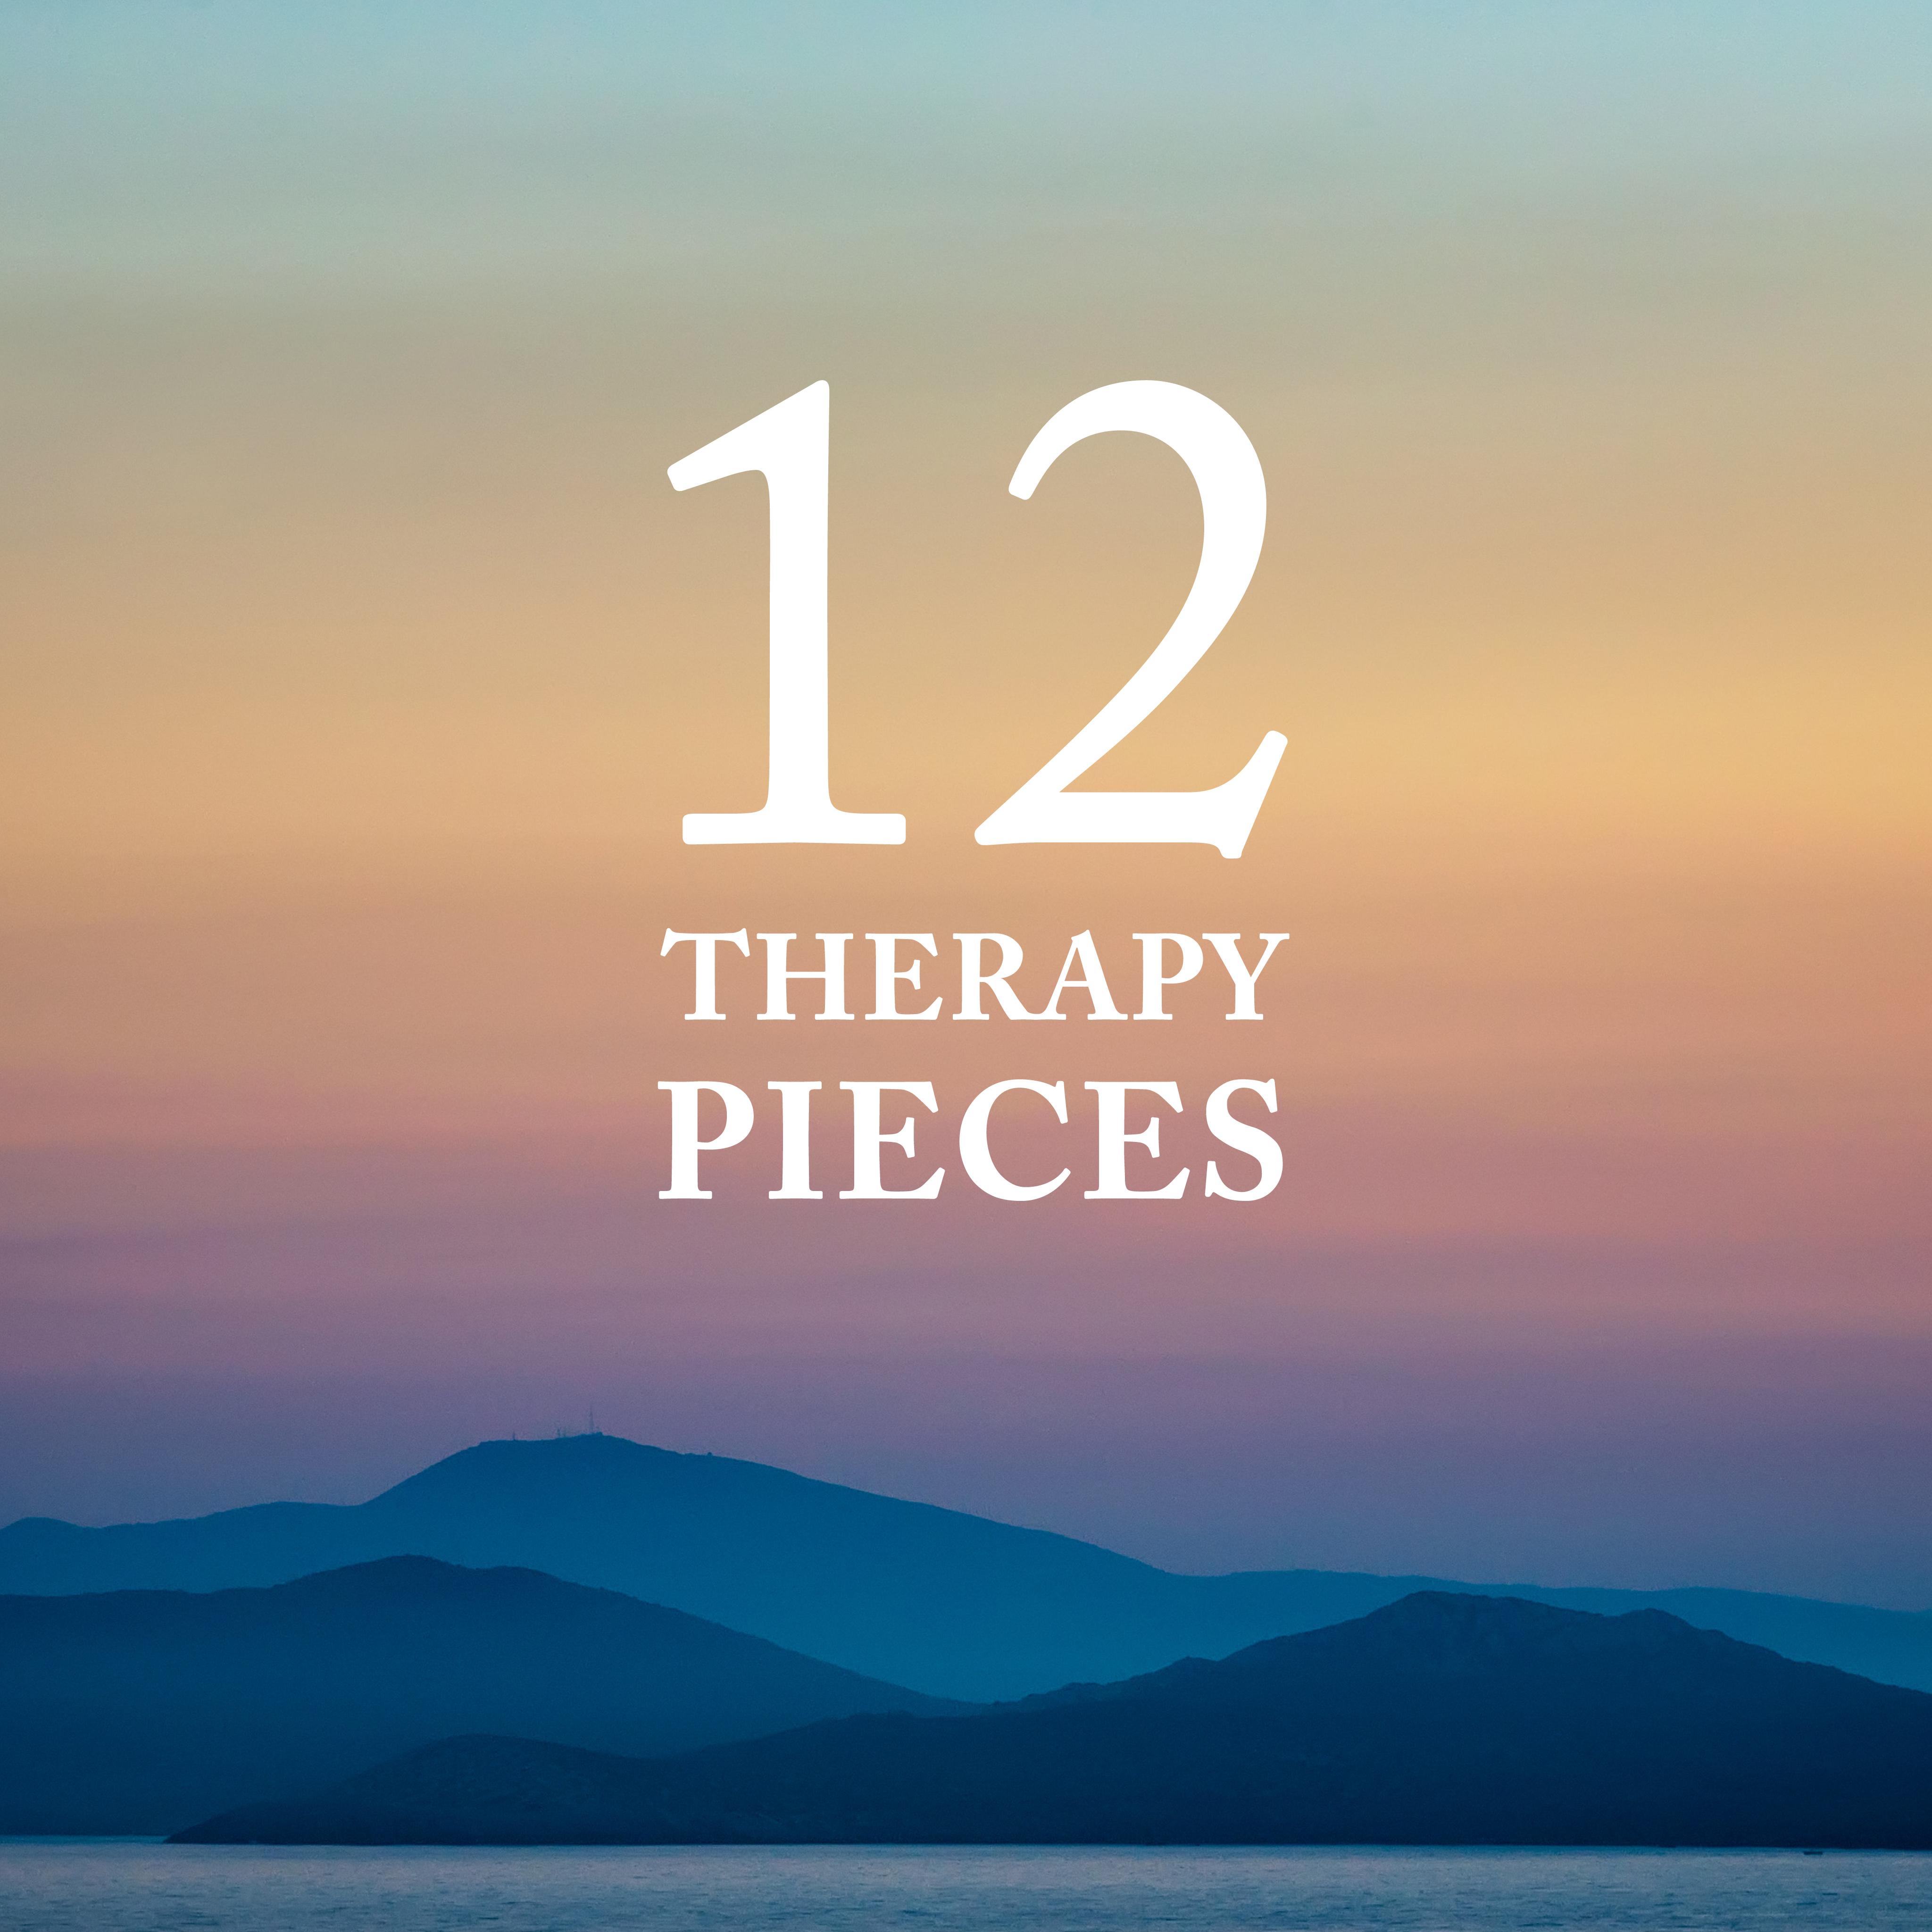 12 Therapy Pieces